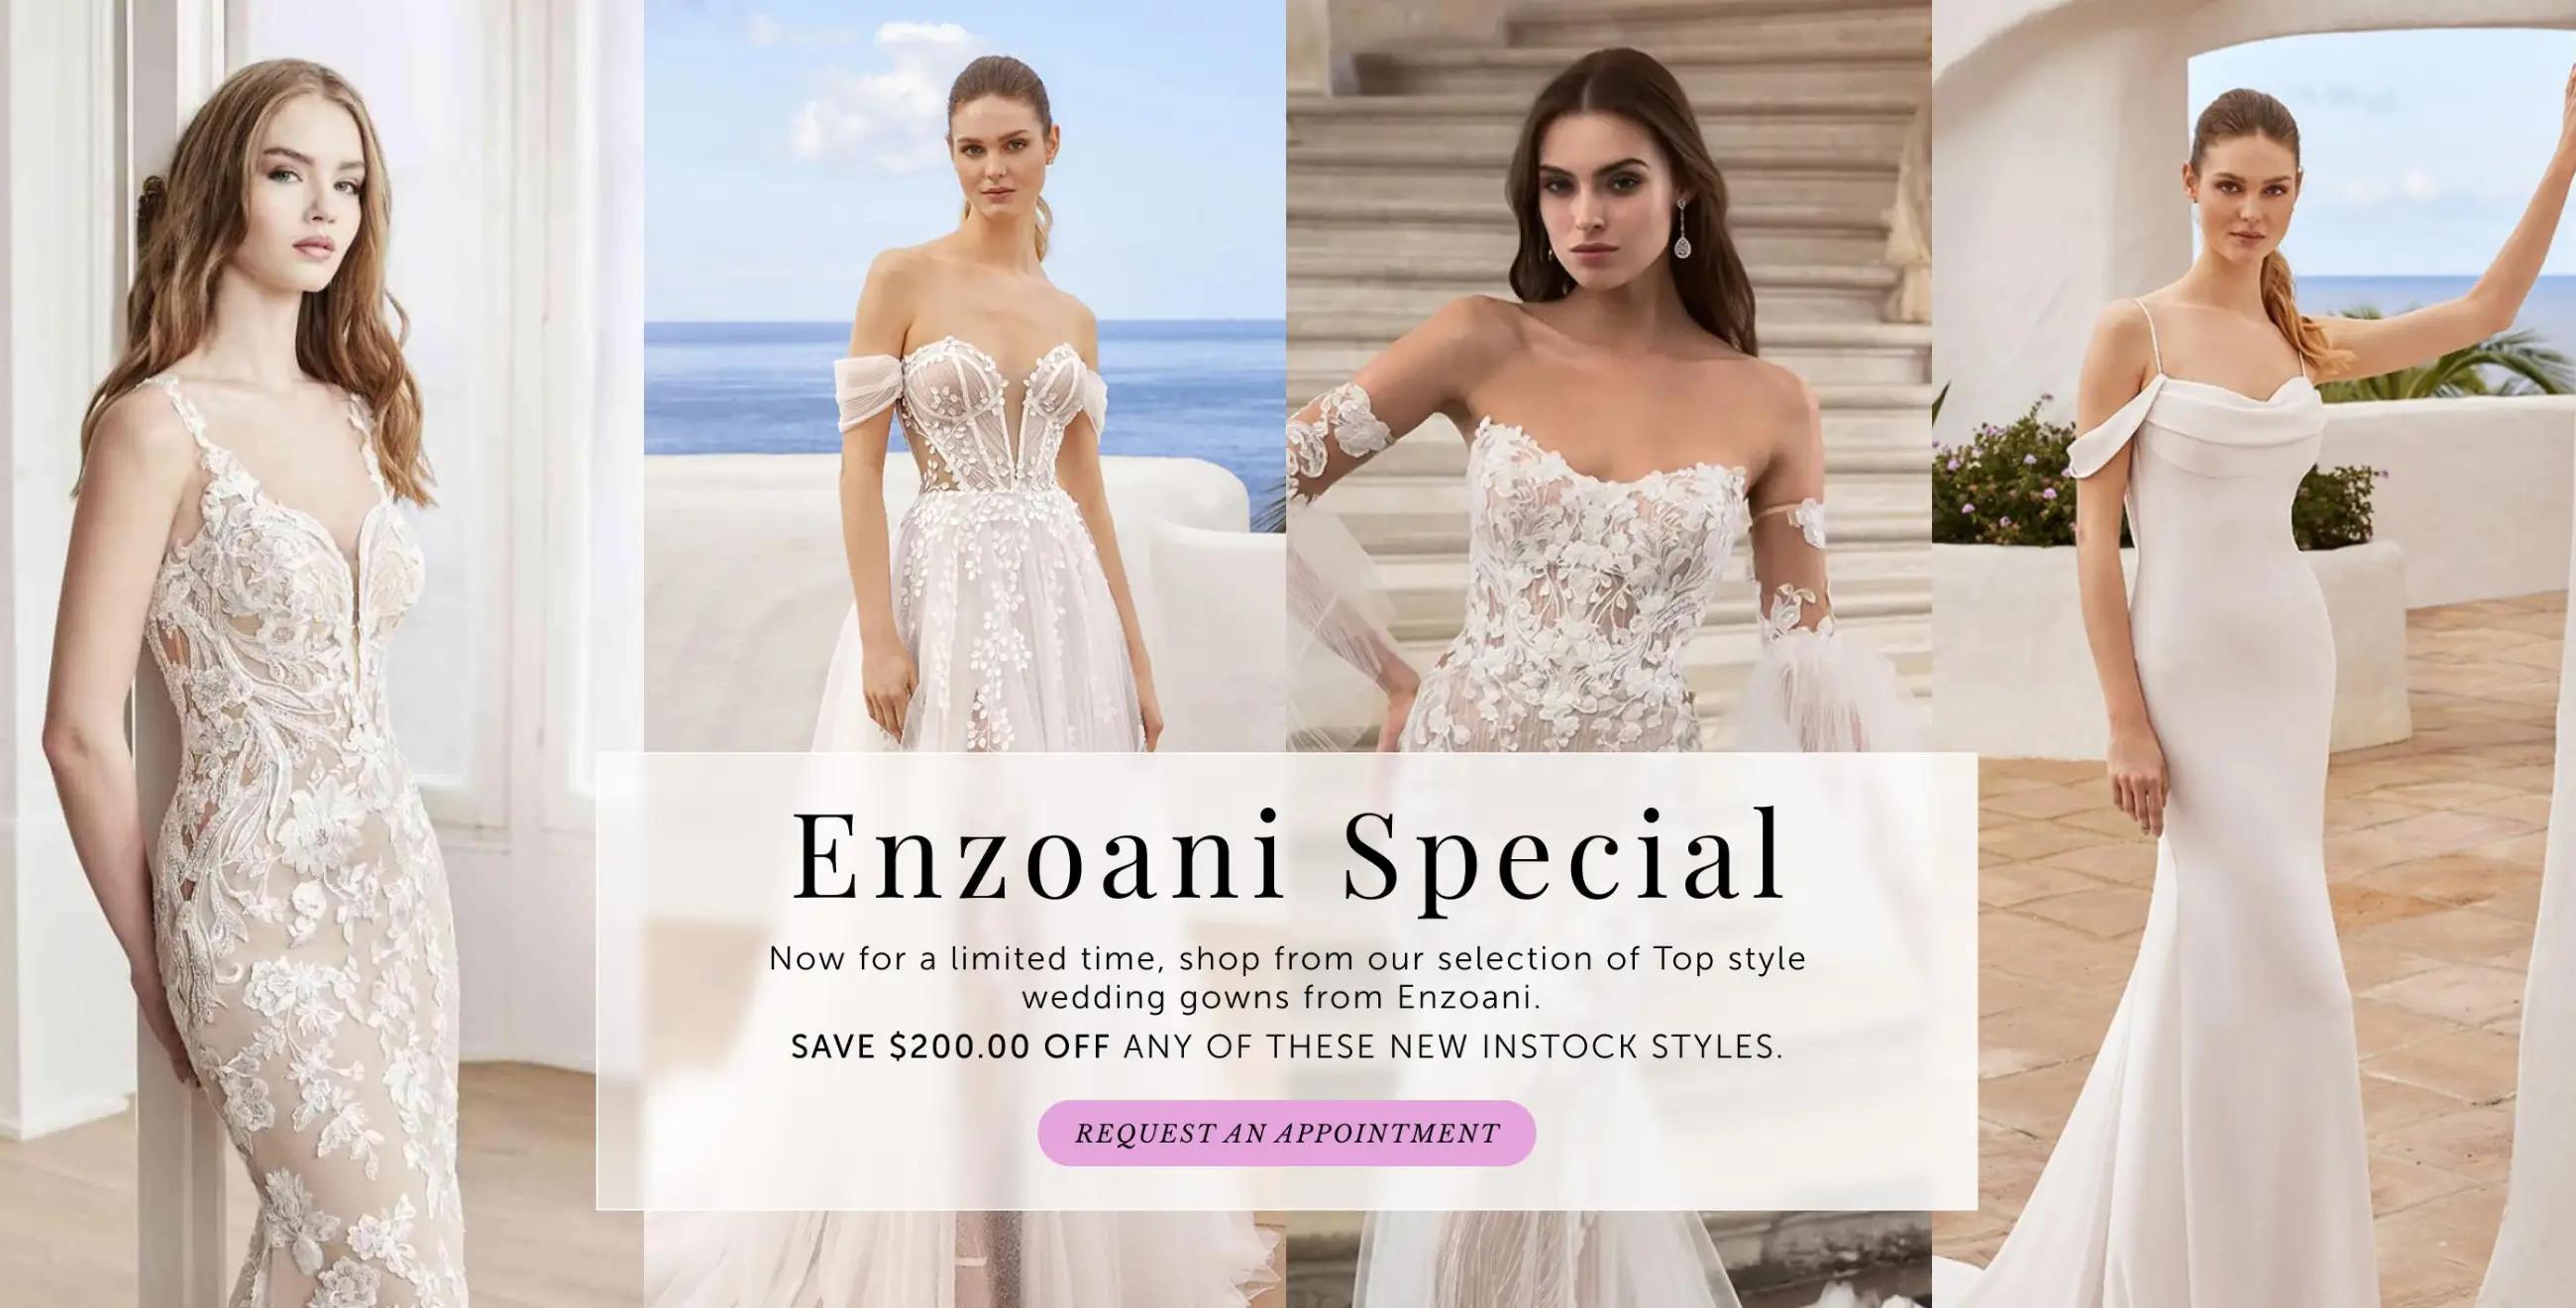 Enzoani Special at Trudys Brides